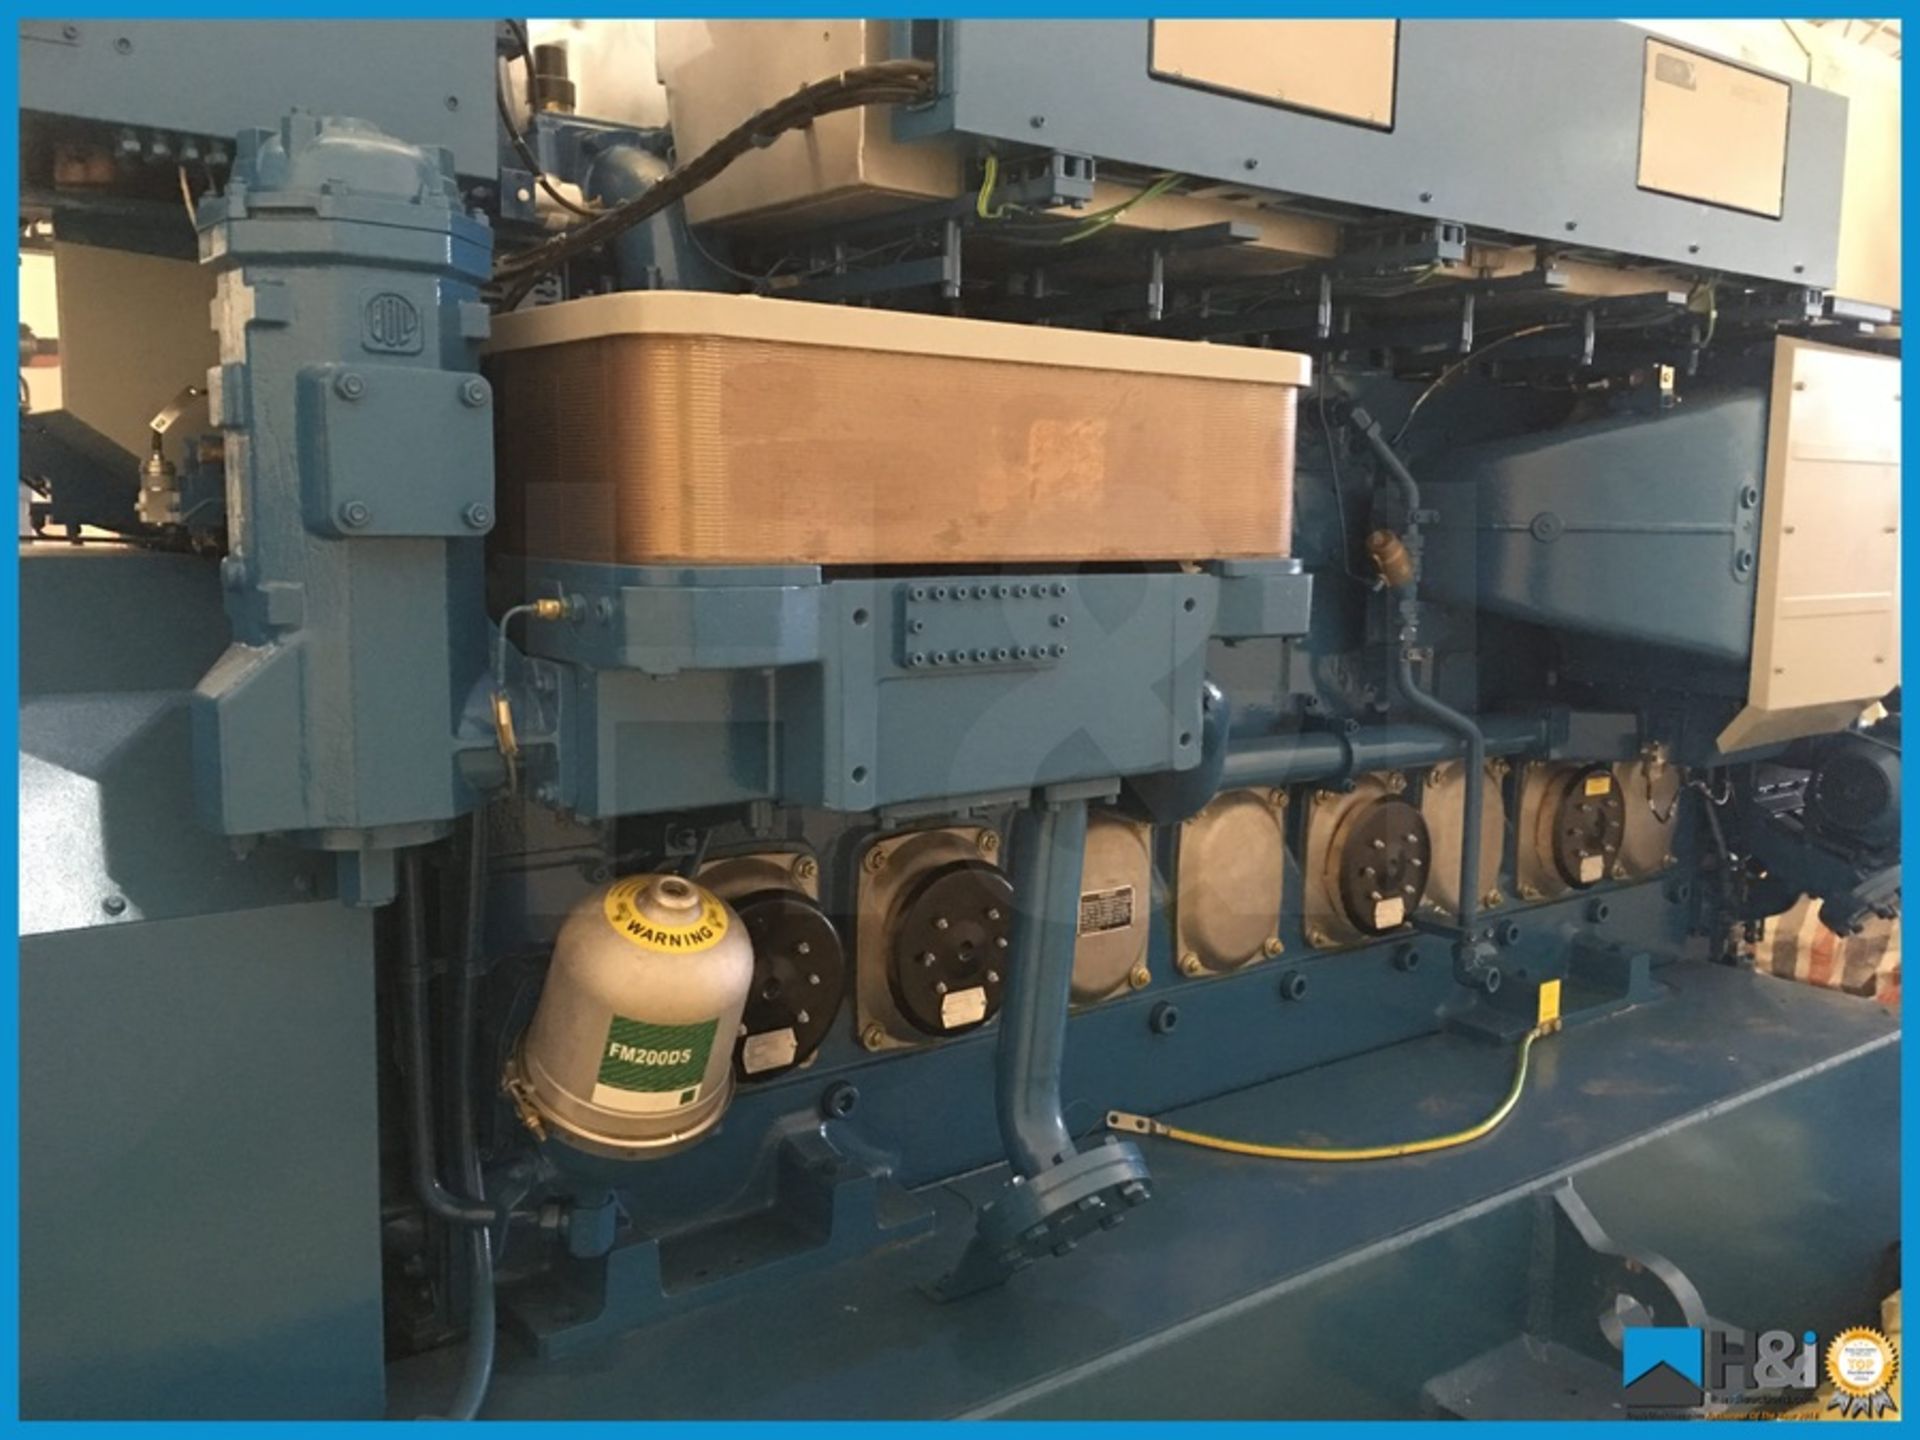 Unused Wartsila 8L20 high capacity diesel generator manufactured in 2013 for a large marine - Image 13 of 19